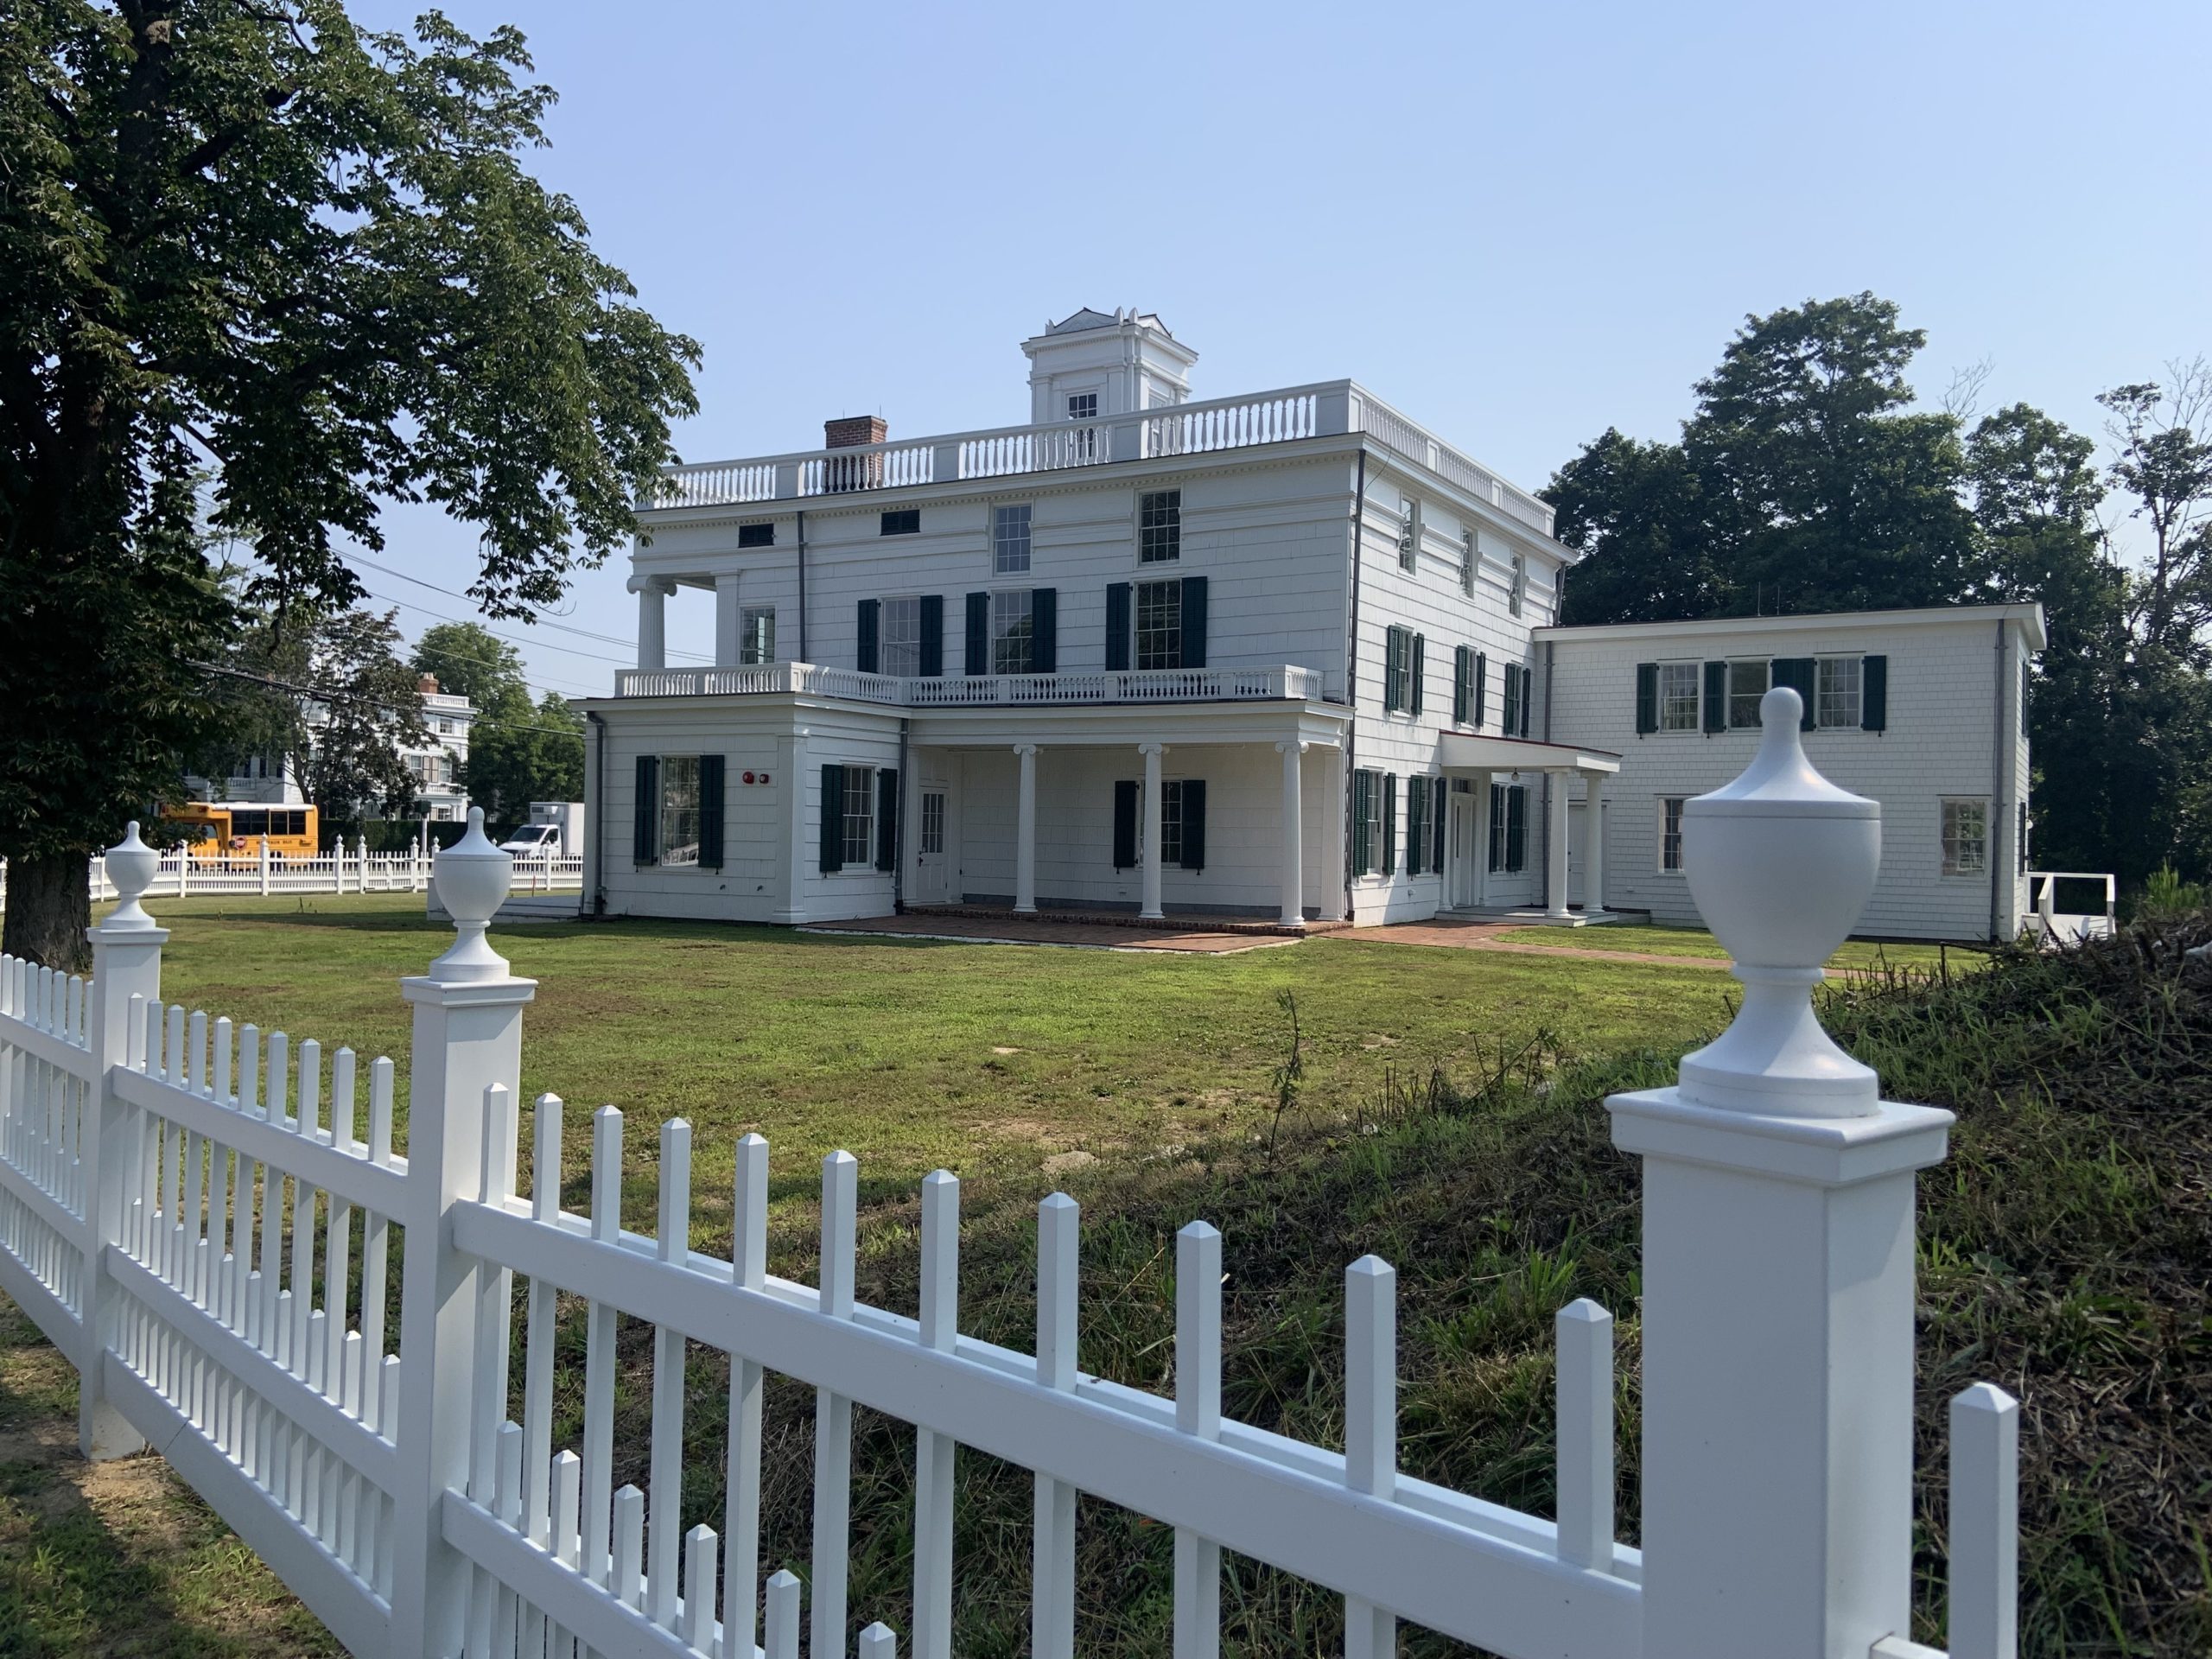 The Nathaniel Rogers House, the new home of the Bridgehampton Museum, as seen from Ocean Road. STEPHEN J. KOTZ